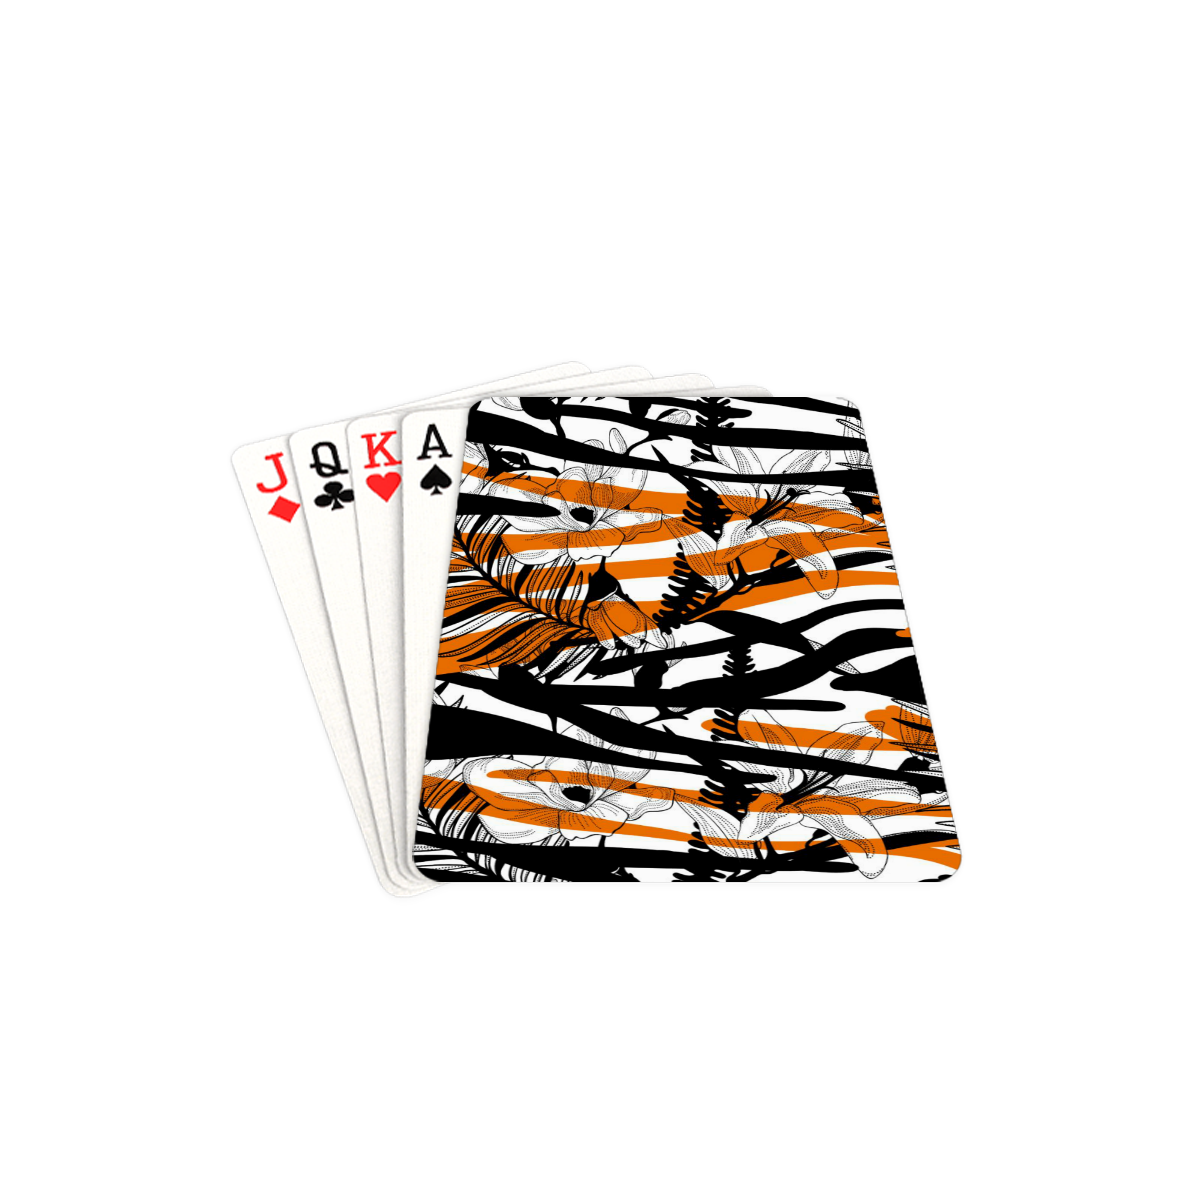 Floral Tiger Print Playing Cards 2.5"x3.5"